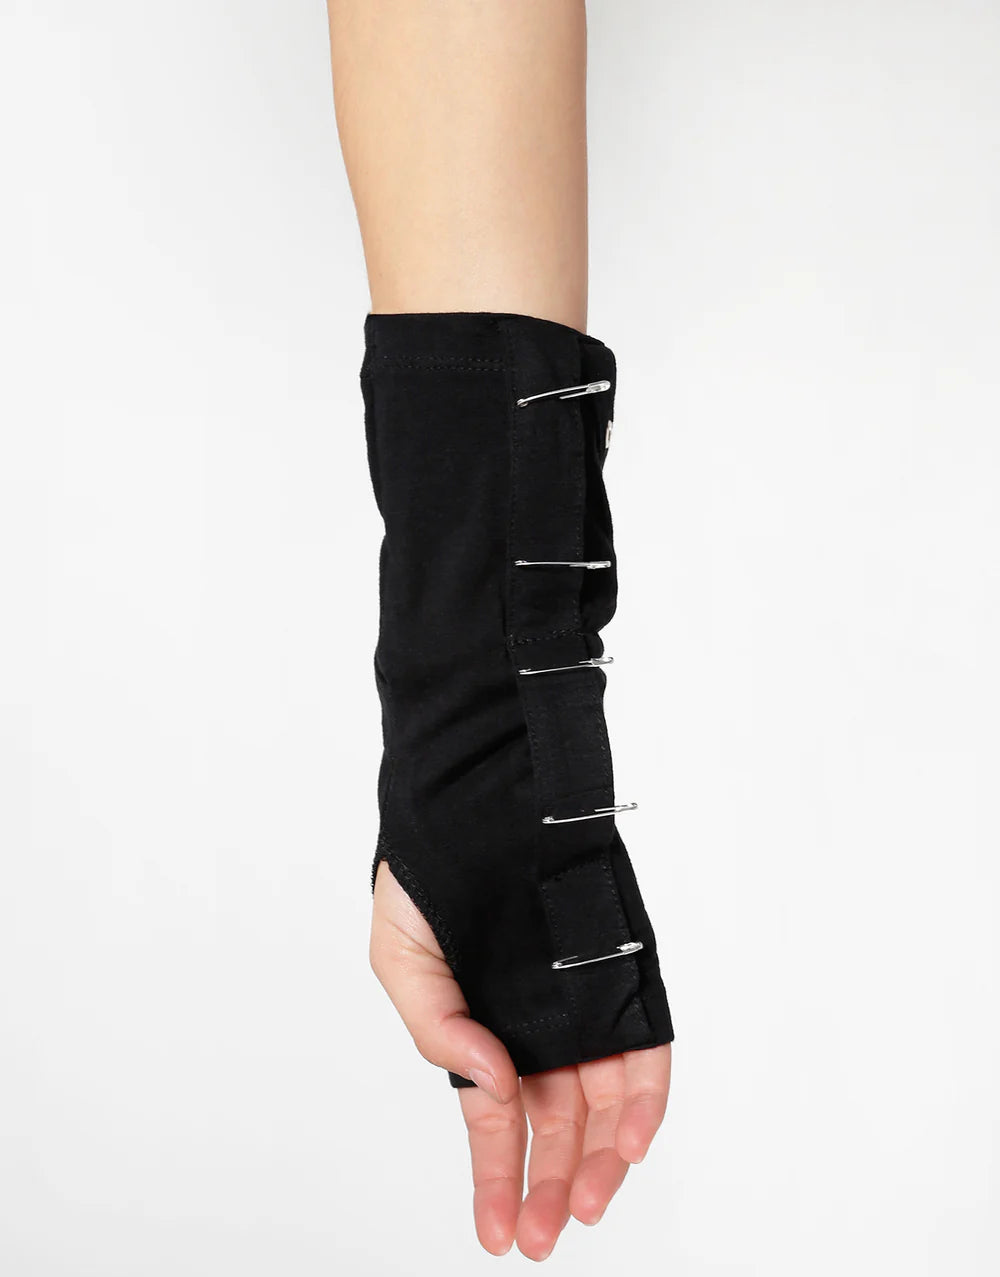 TRIPP NYC SAFETY PIN AND TAIL ARMWARMER